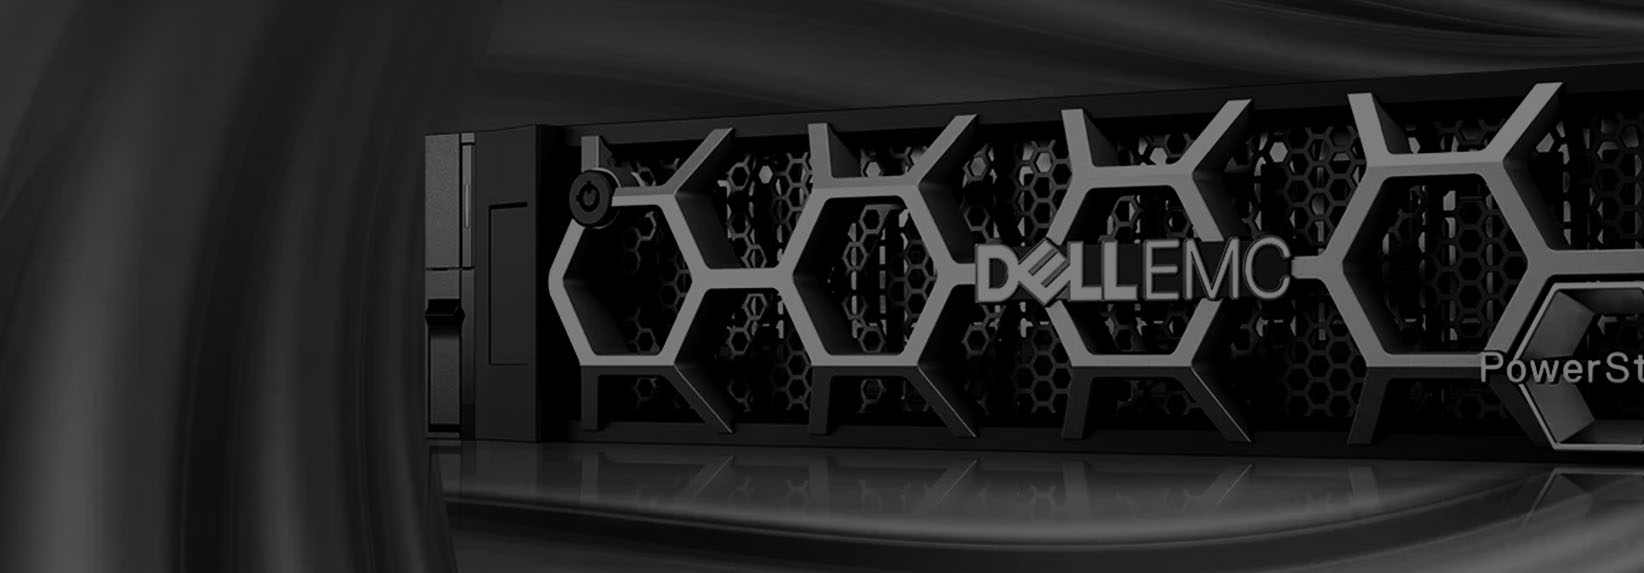 DobiMigrate Now Integrated with Dell EMC PowerStore for Fast Migration of Legacy Systems